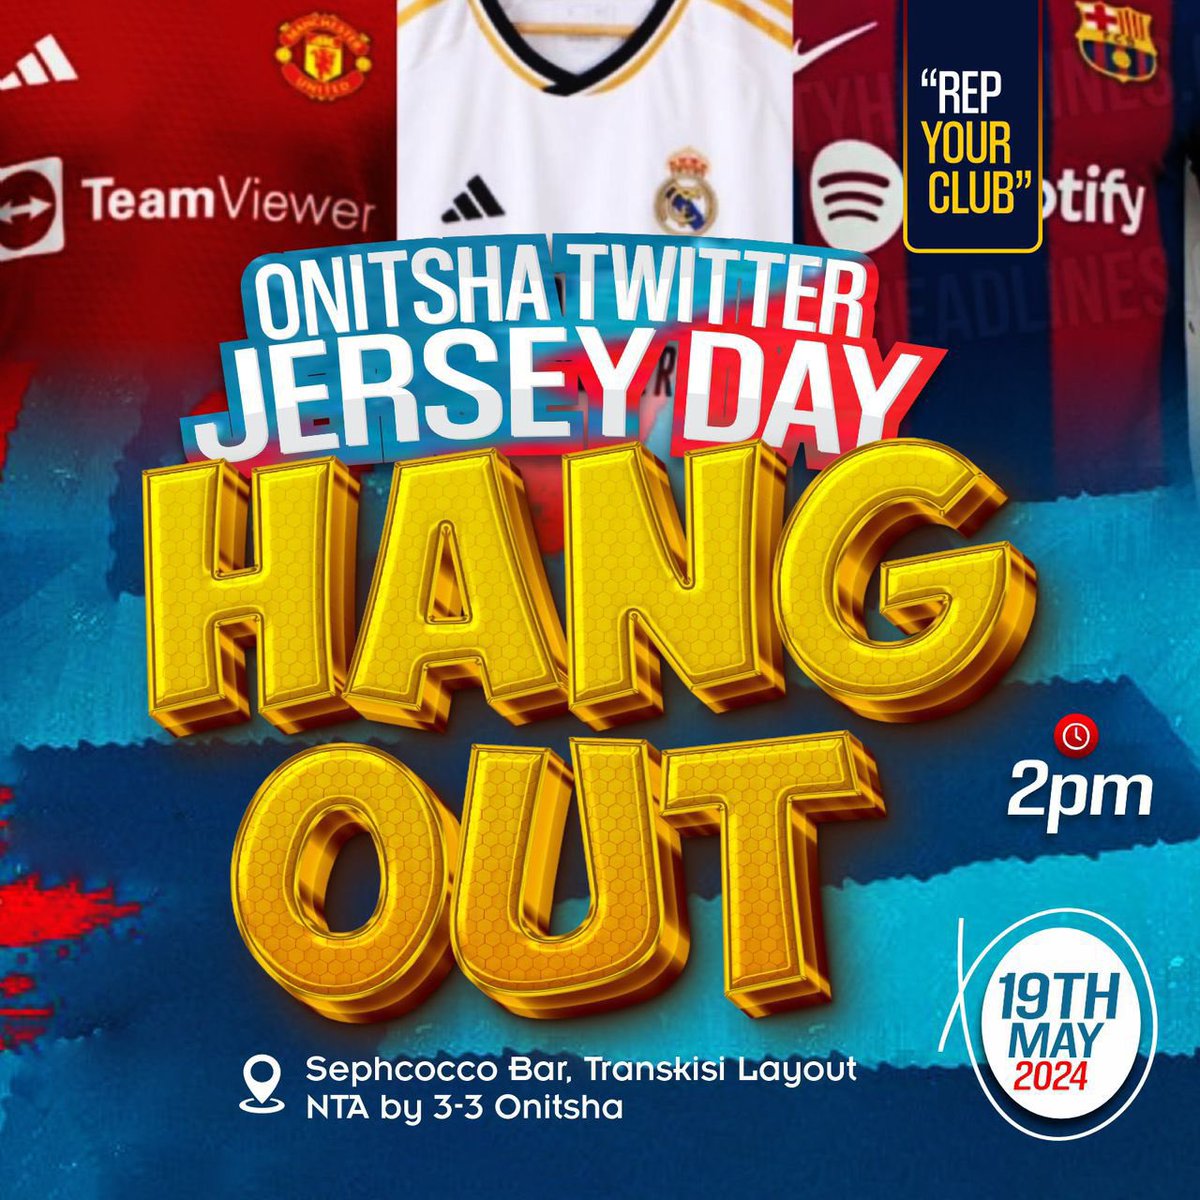 If you follow me I promise to follow back immediately. Plus am promising to reserve you a sit at #OnitshaTwitterCommunity #RepYourClub
#OnitshaTwitterJerseyHangout happening on the 19th May. Trust me it's going to be funnnnn 😉😎😋🤩